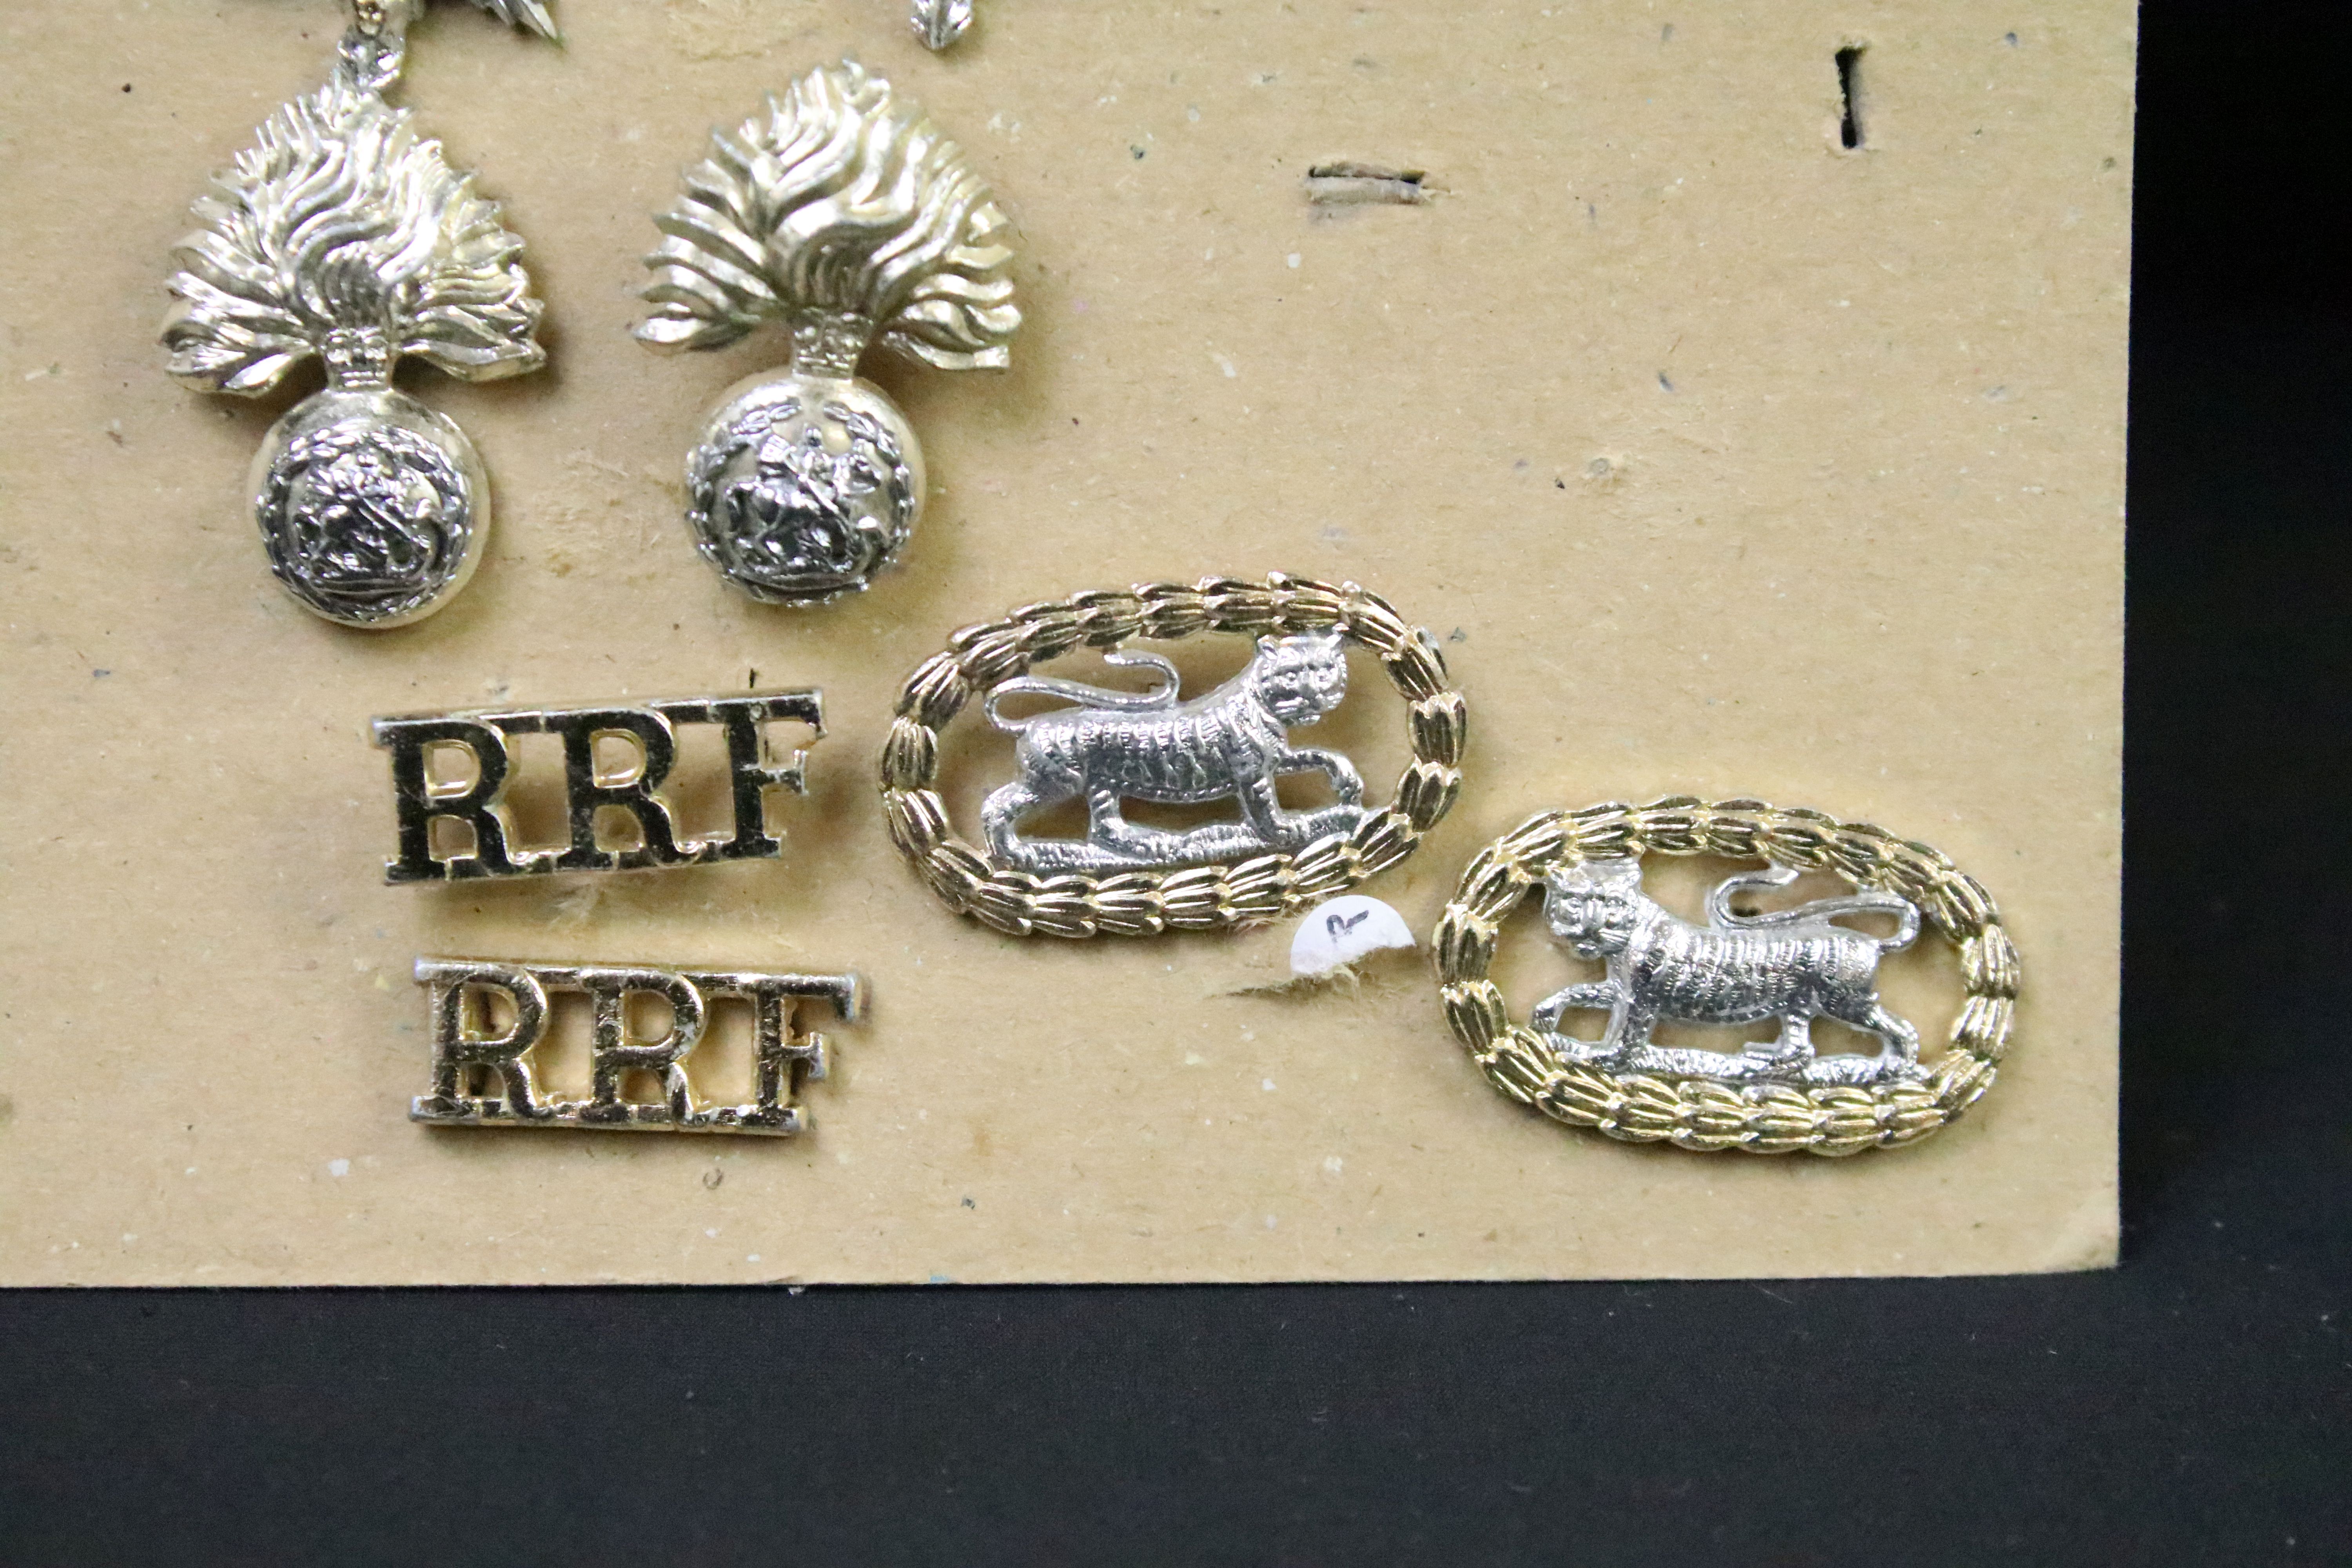 A collection of British military Regimental cap and collar badges to include the Yorkshire Regiment, - Image 13 of 13